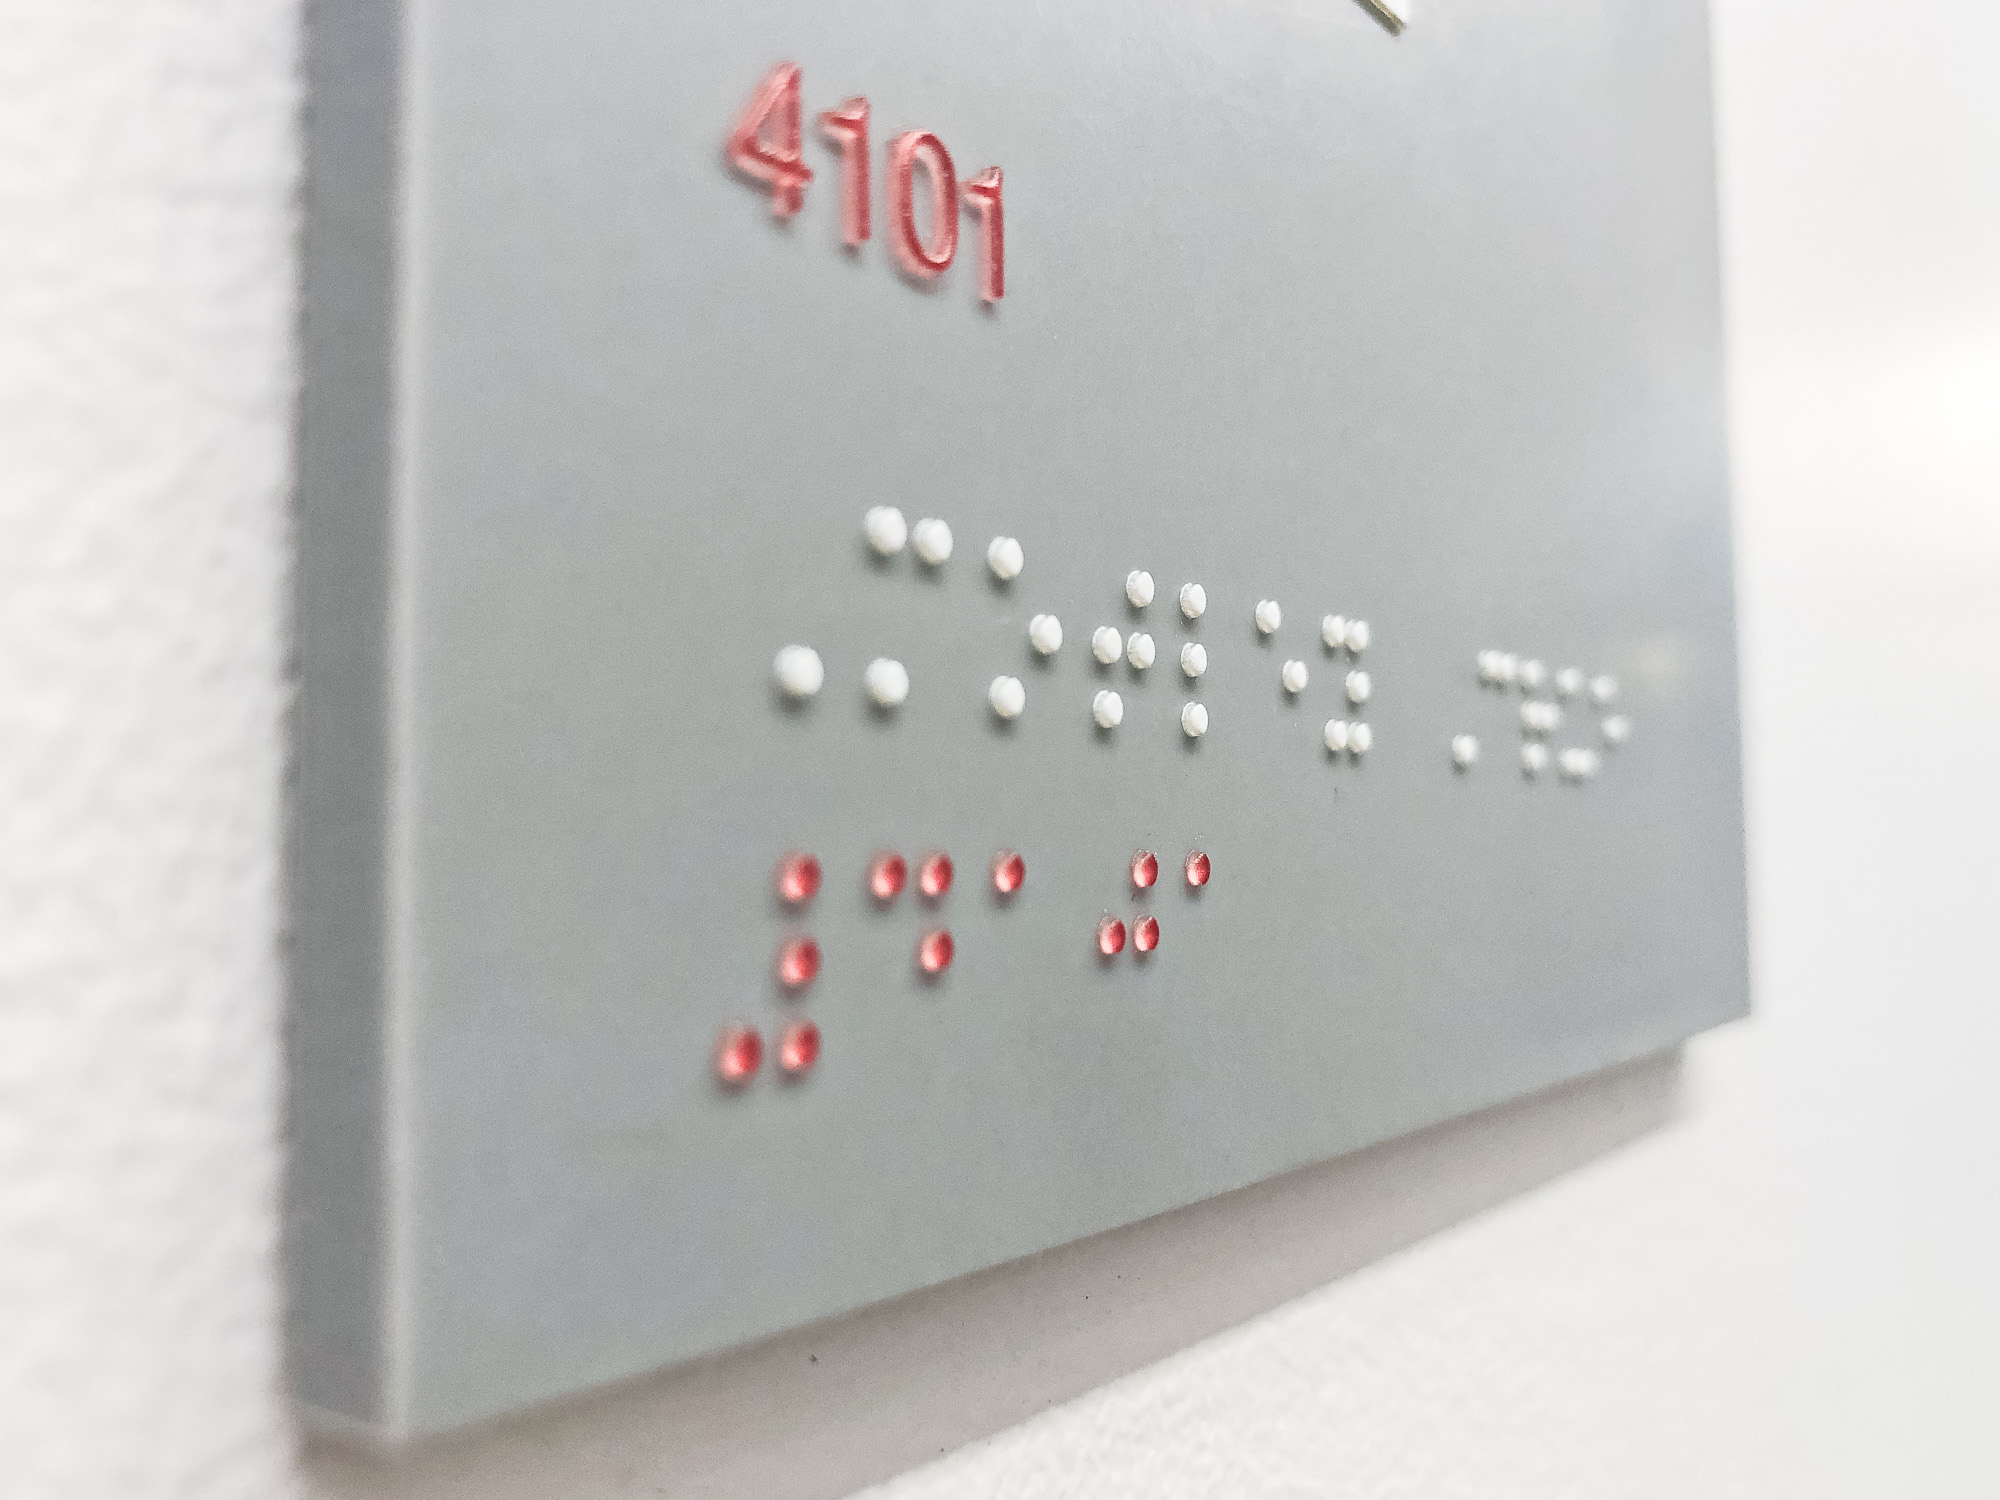 Grey and white meeting room ADA signs with Braille for the San Francisco office of Gong, a conversation intelligence platform for sales.